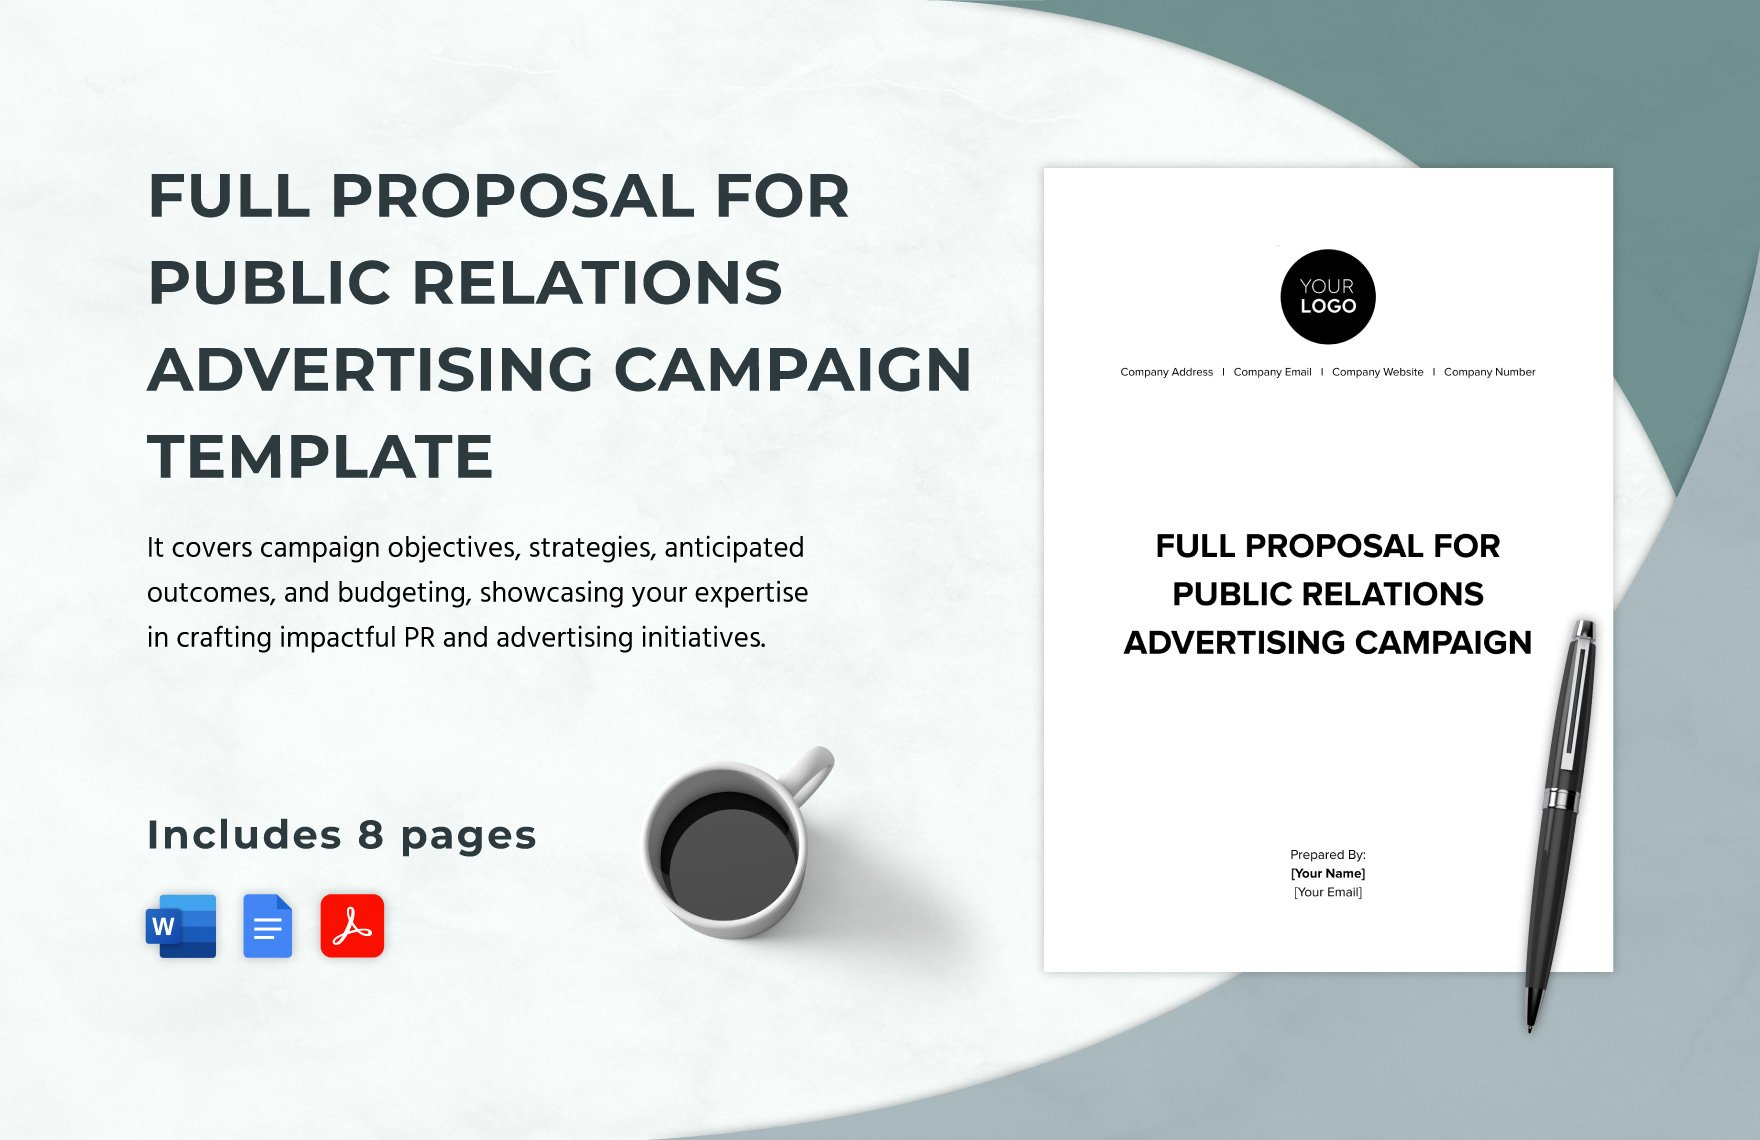 Full Proposal for Public Relations Advertising Campaign Template